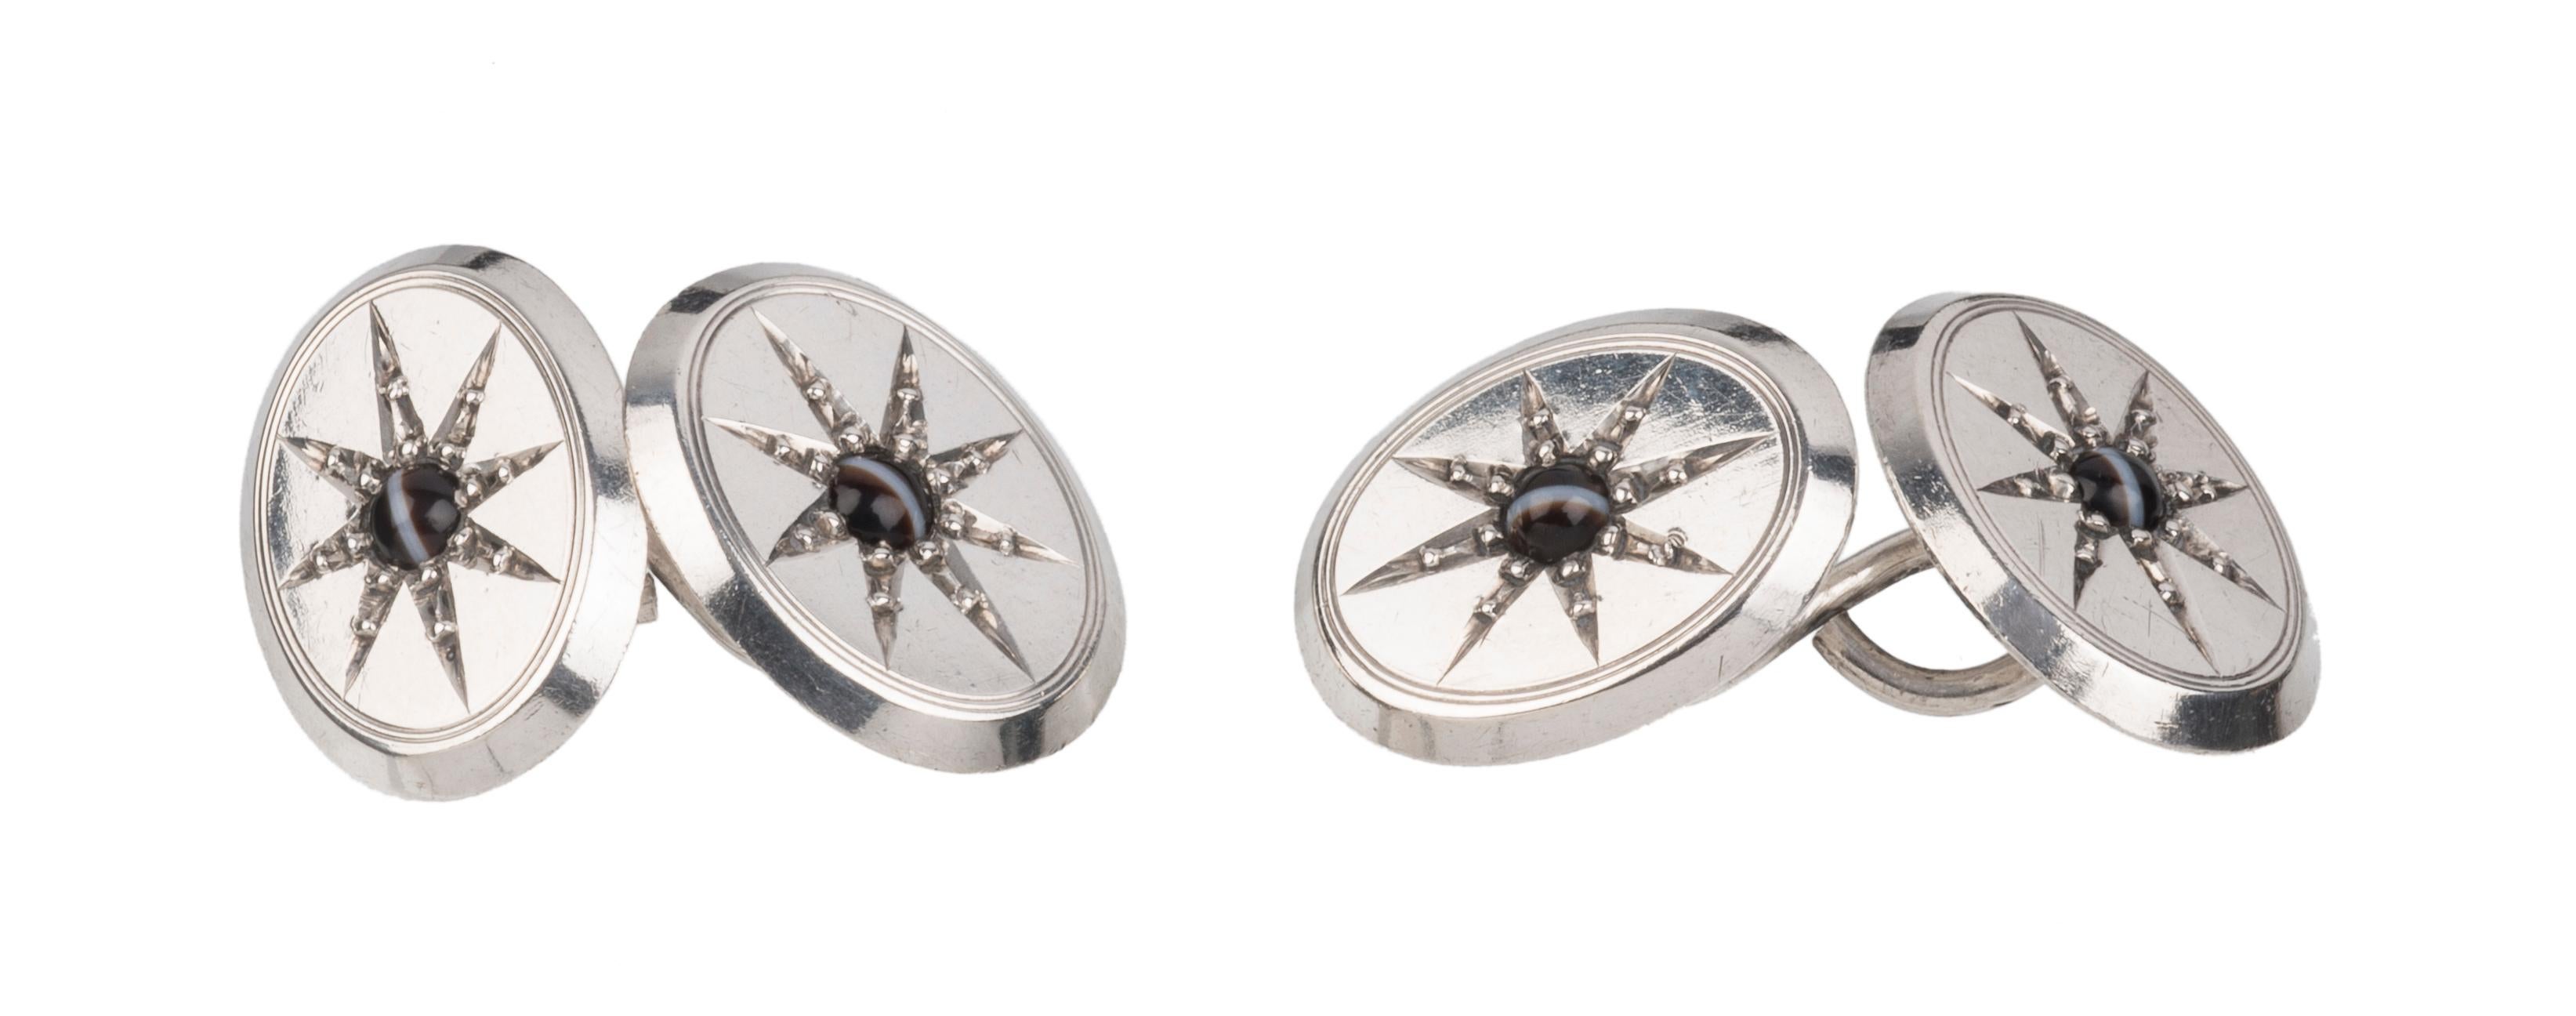 Each cufflink consists of two silver oval plaques that are connected by an s-shaped silver hook. The oval segments are embellished with an eight-pointed star framed by a double engraved oval line. Every star holds a banded agate. It's rays are